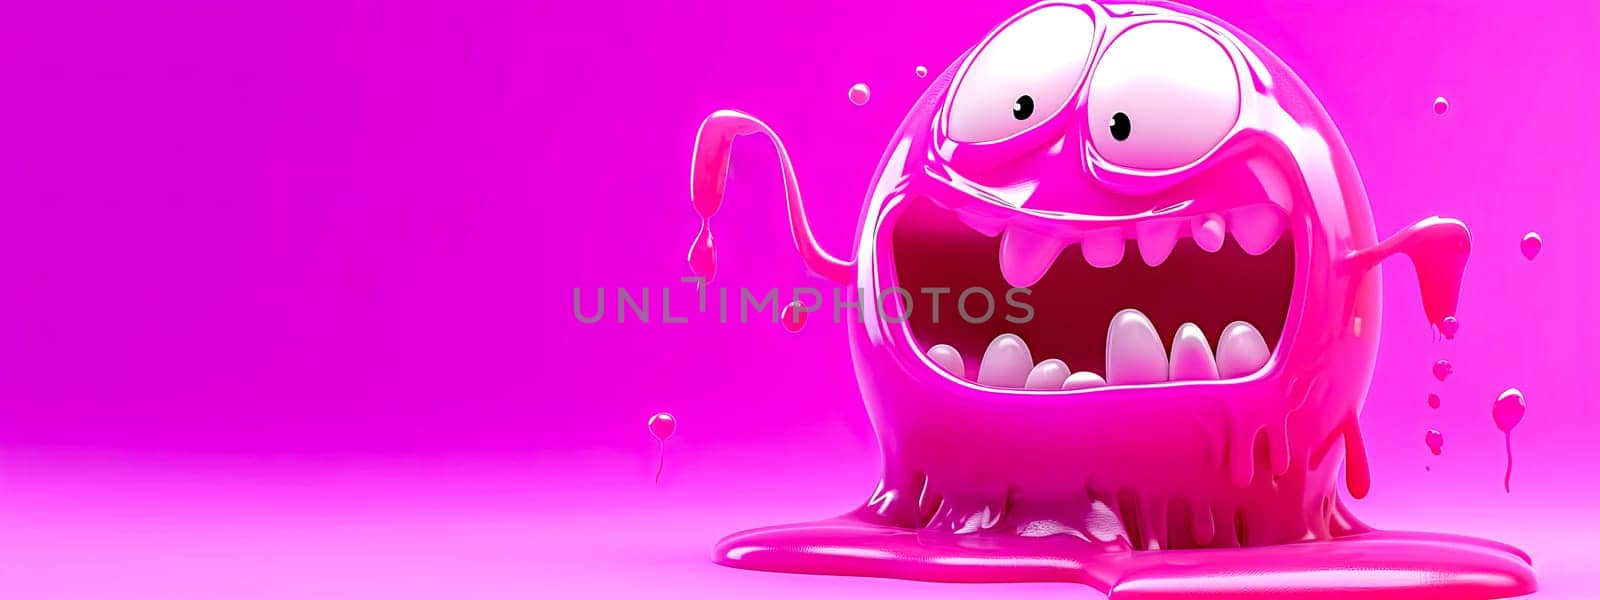 pink gelatinous cartoon character with oversized eyes and an open mouth, conveying a playful and zany expression against a solid background, banner with copy space